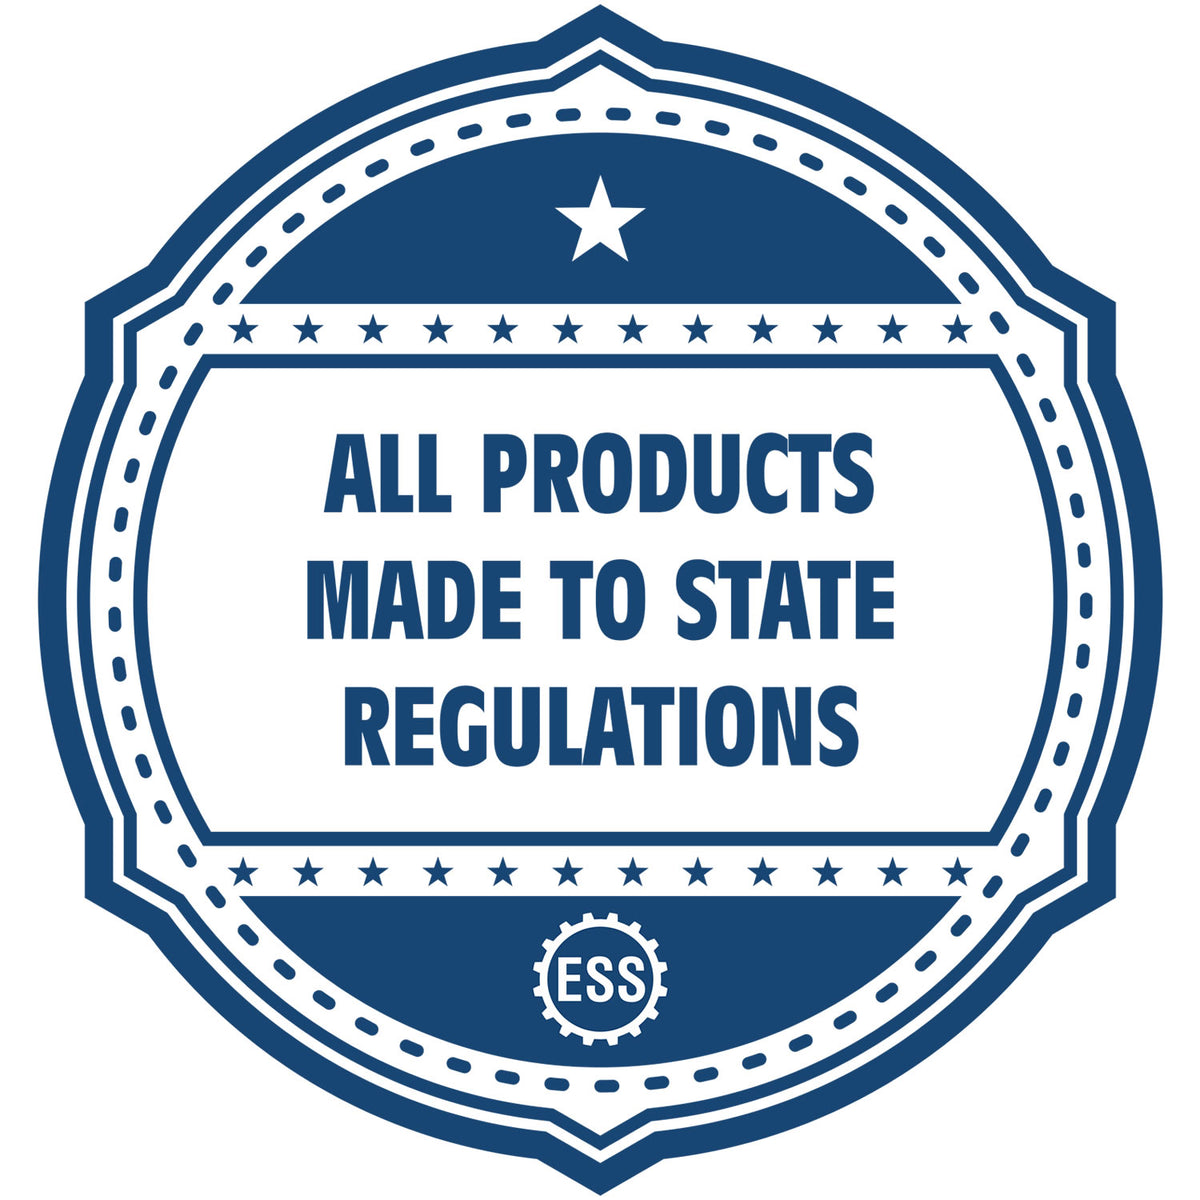 An icon or badge element for the Wooden Handle South Dakota Rectangular Notary Public Stamp showing that this product is made in compliance with state regulations.